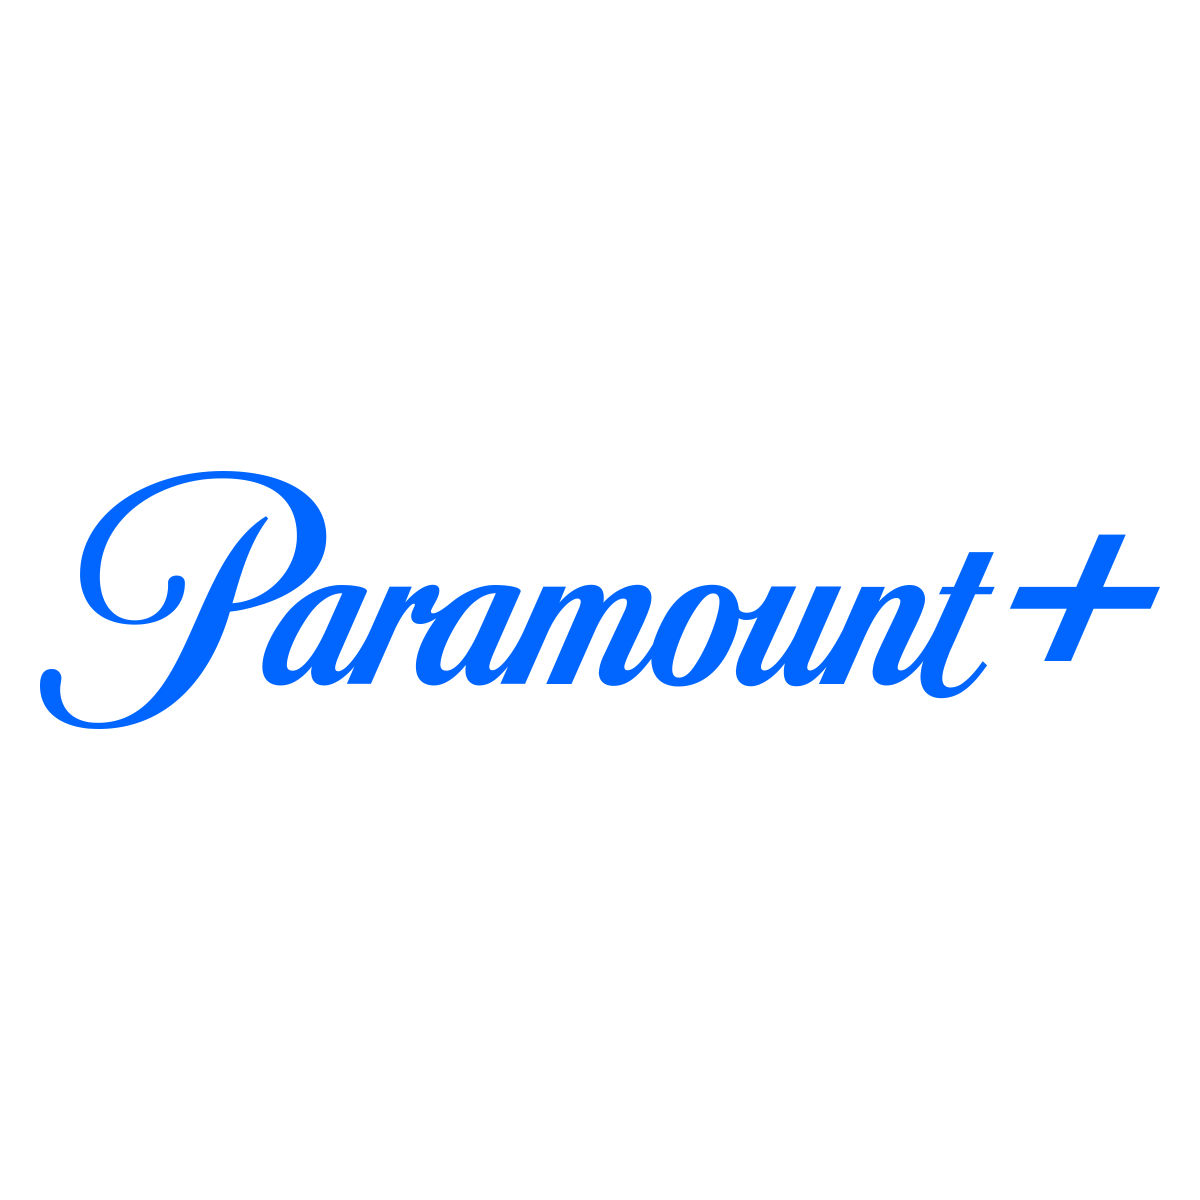 nfl and paramount plus